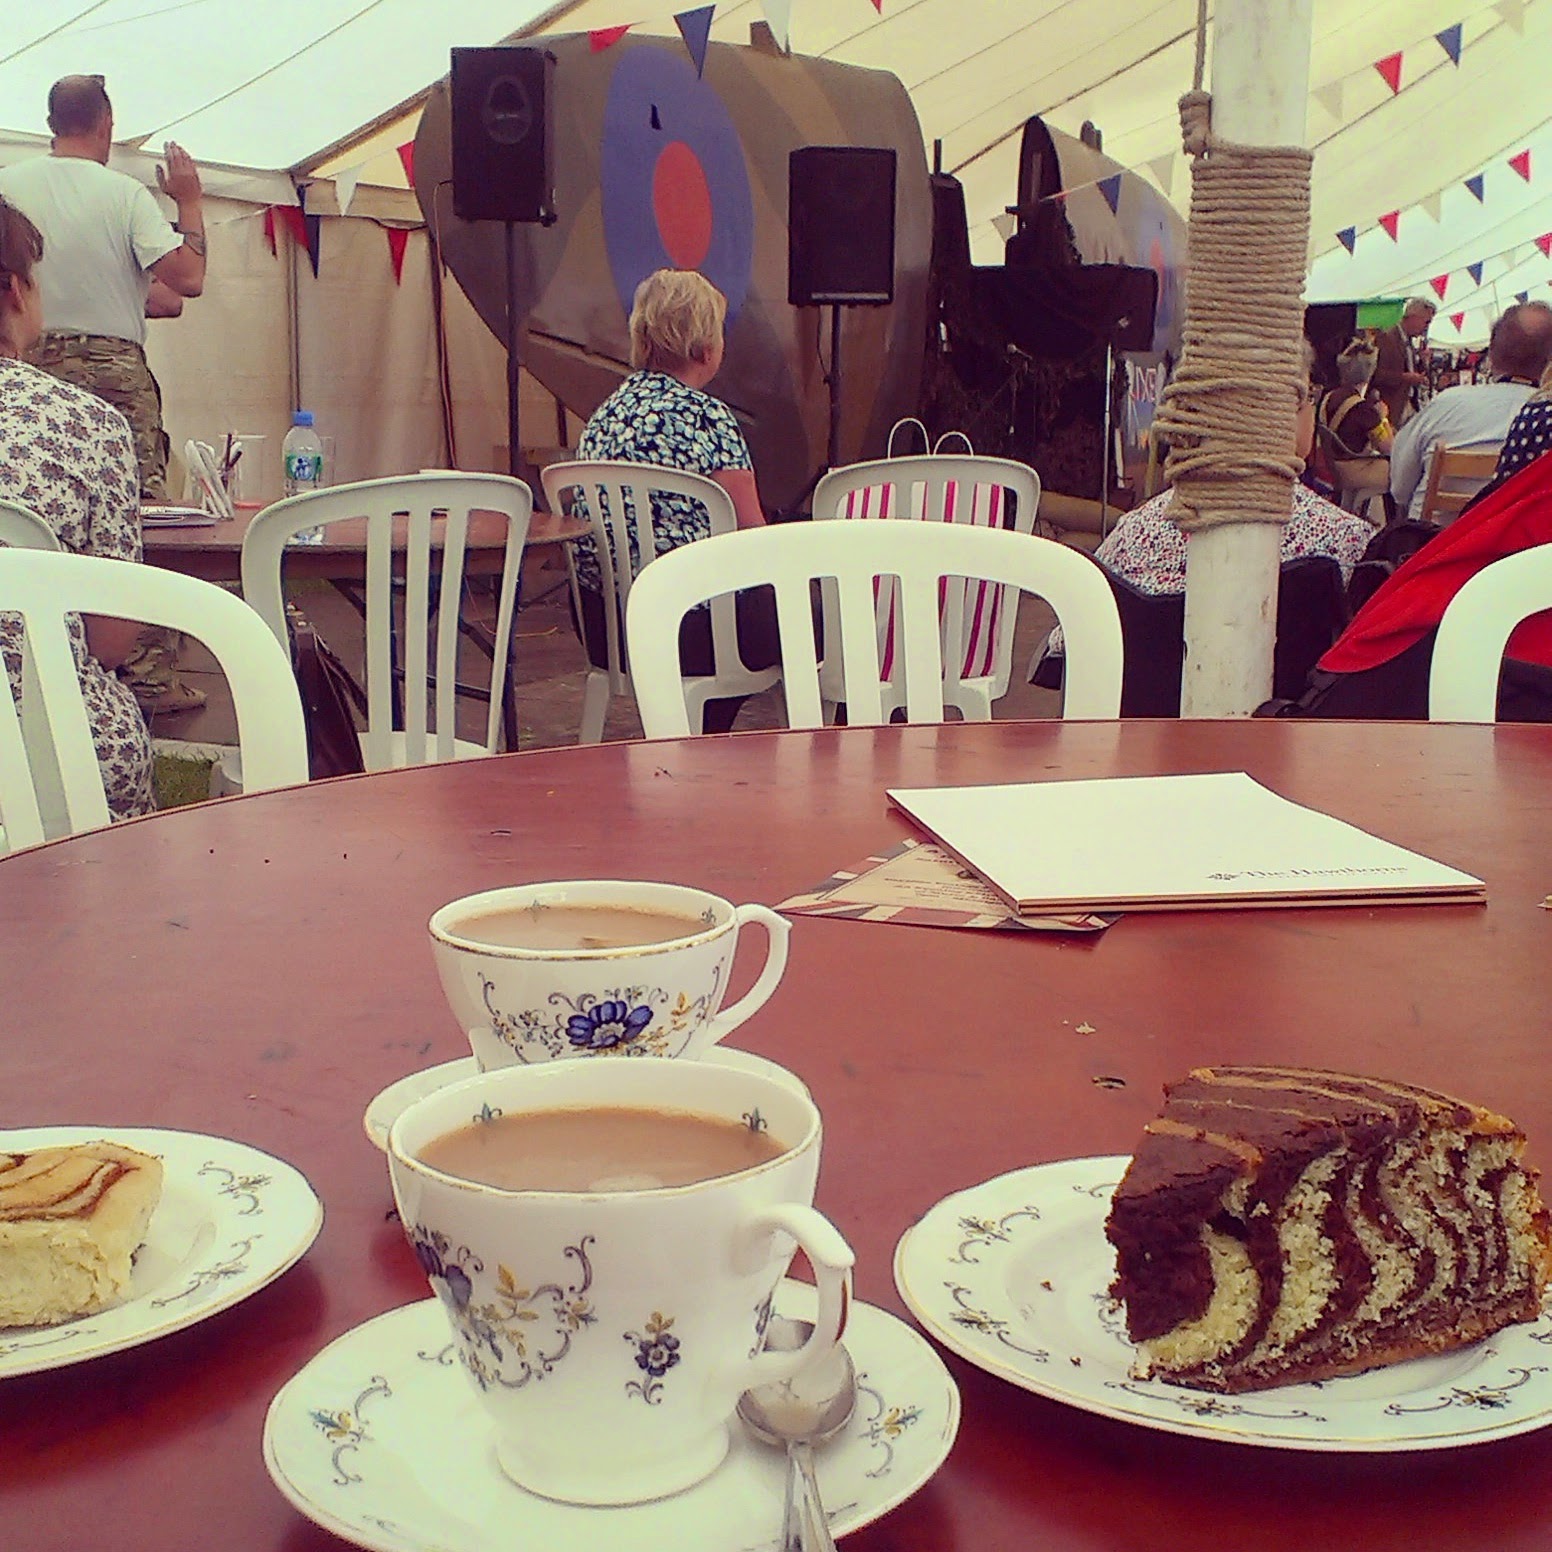 Cake and tea at the Dig for Victory show